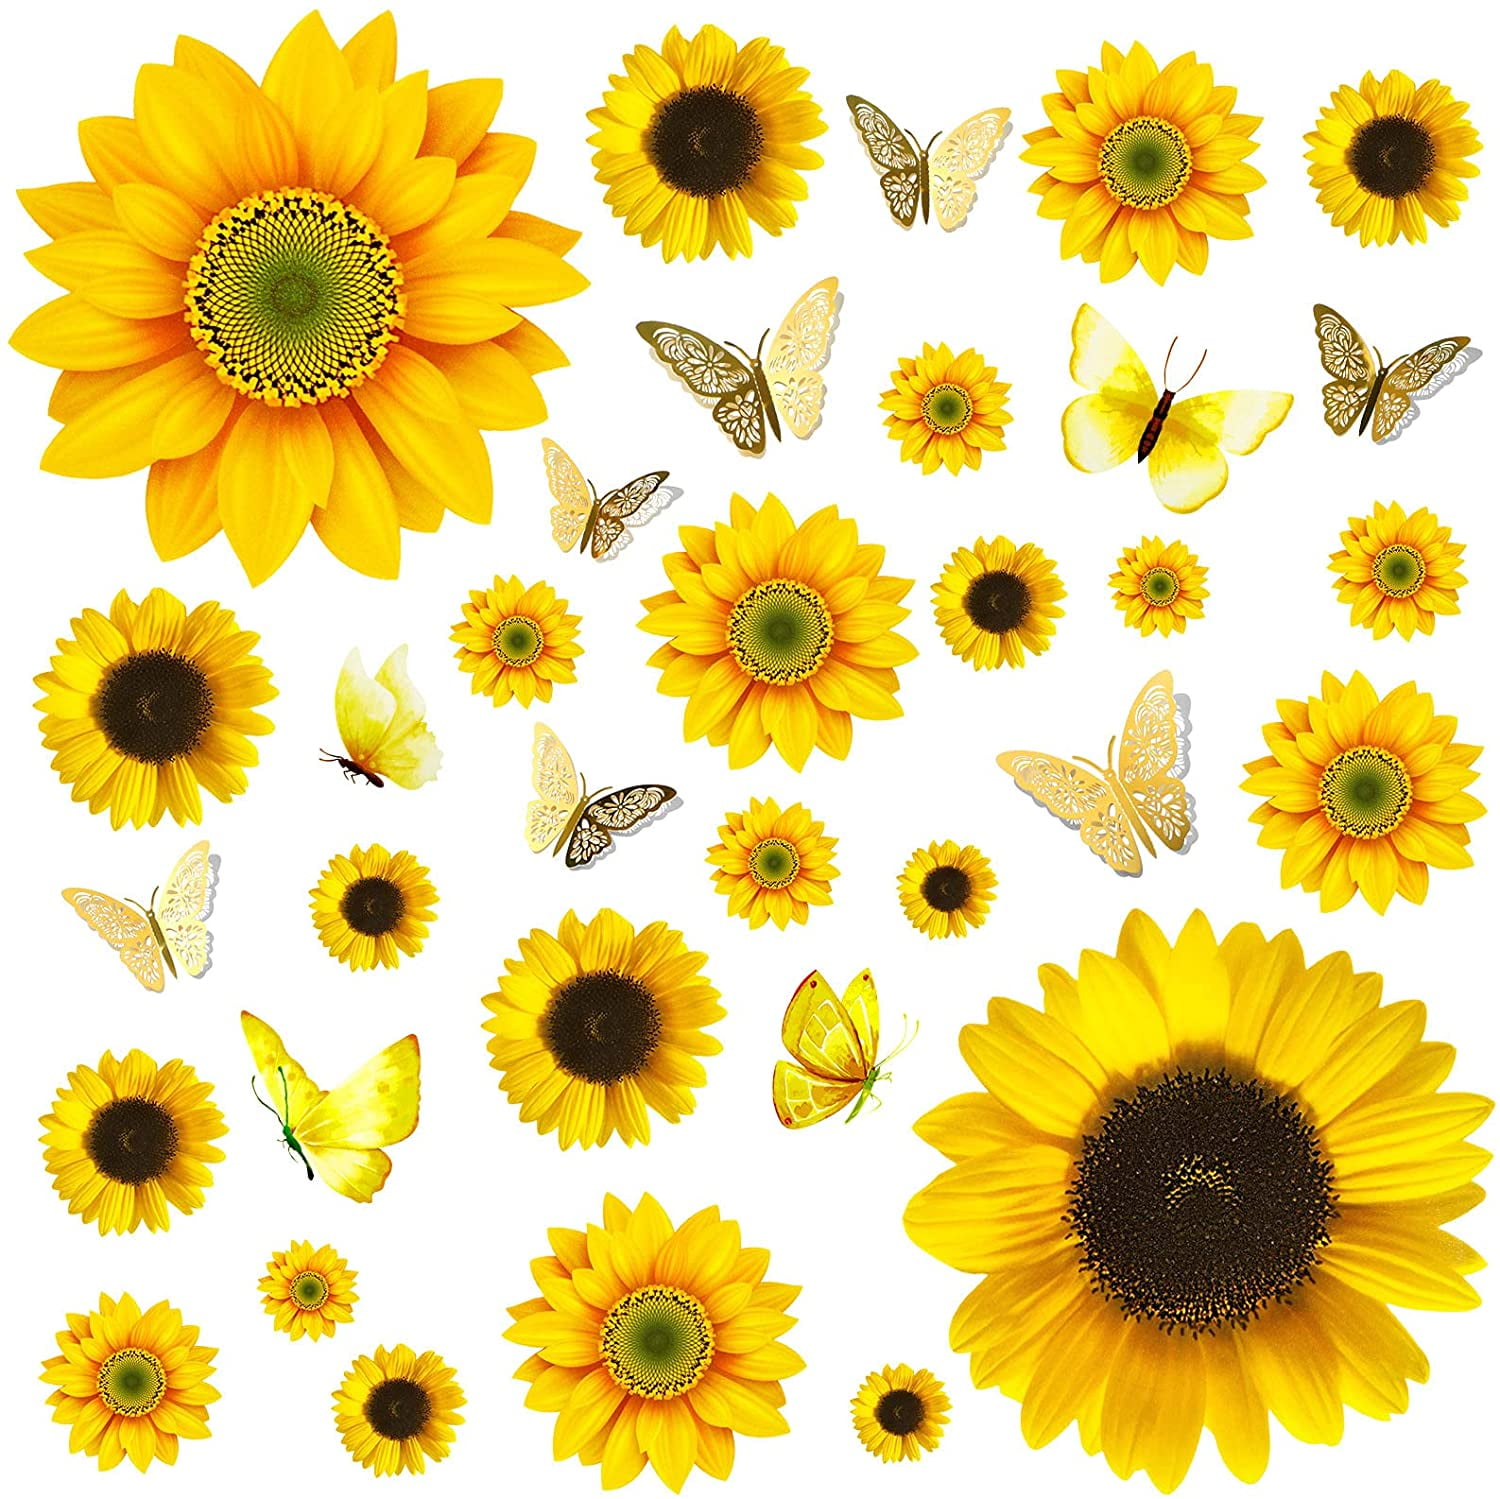 Sunflower Wall Decals with Butterfly Removable Yellow Flower Wall Stickers Self-Adhesive Vinyl Sunflower Stickers for Bedroom Living Room Kitchen Wall Decor Sunflower Wallpaper Wall Decoration 